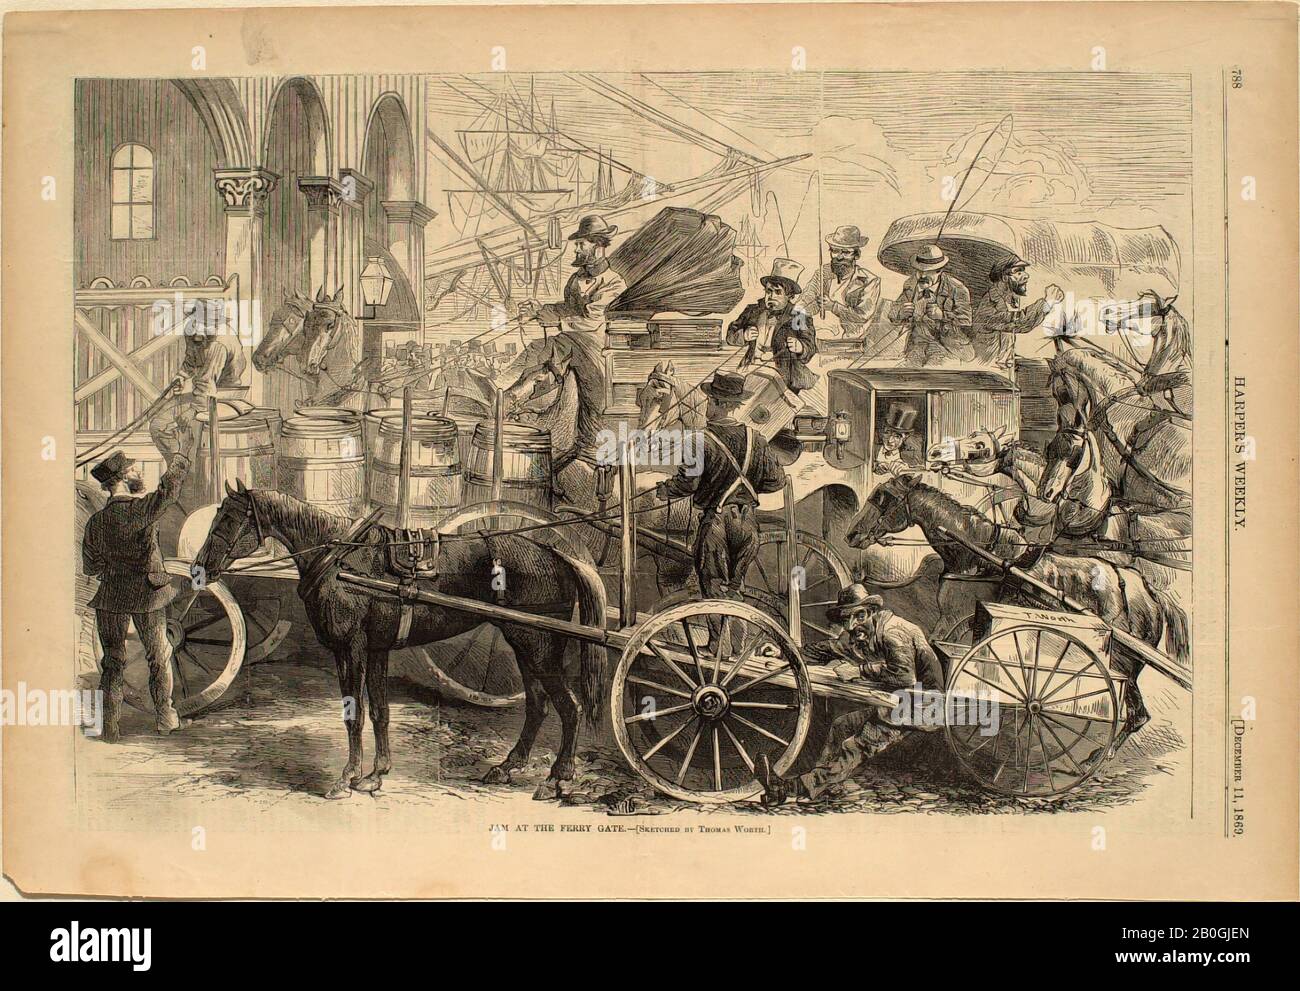 Thomas Worth, American, 1839–1917, Jam at the Ferry Gate, From Harper's Weekly, 1869, Wood engraving on paper, image: 9 1/16 x 13 11/16 in. (23 x 34.8 cm Stock Photo